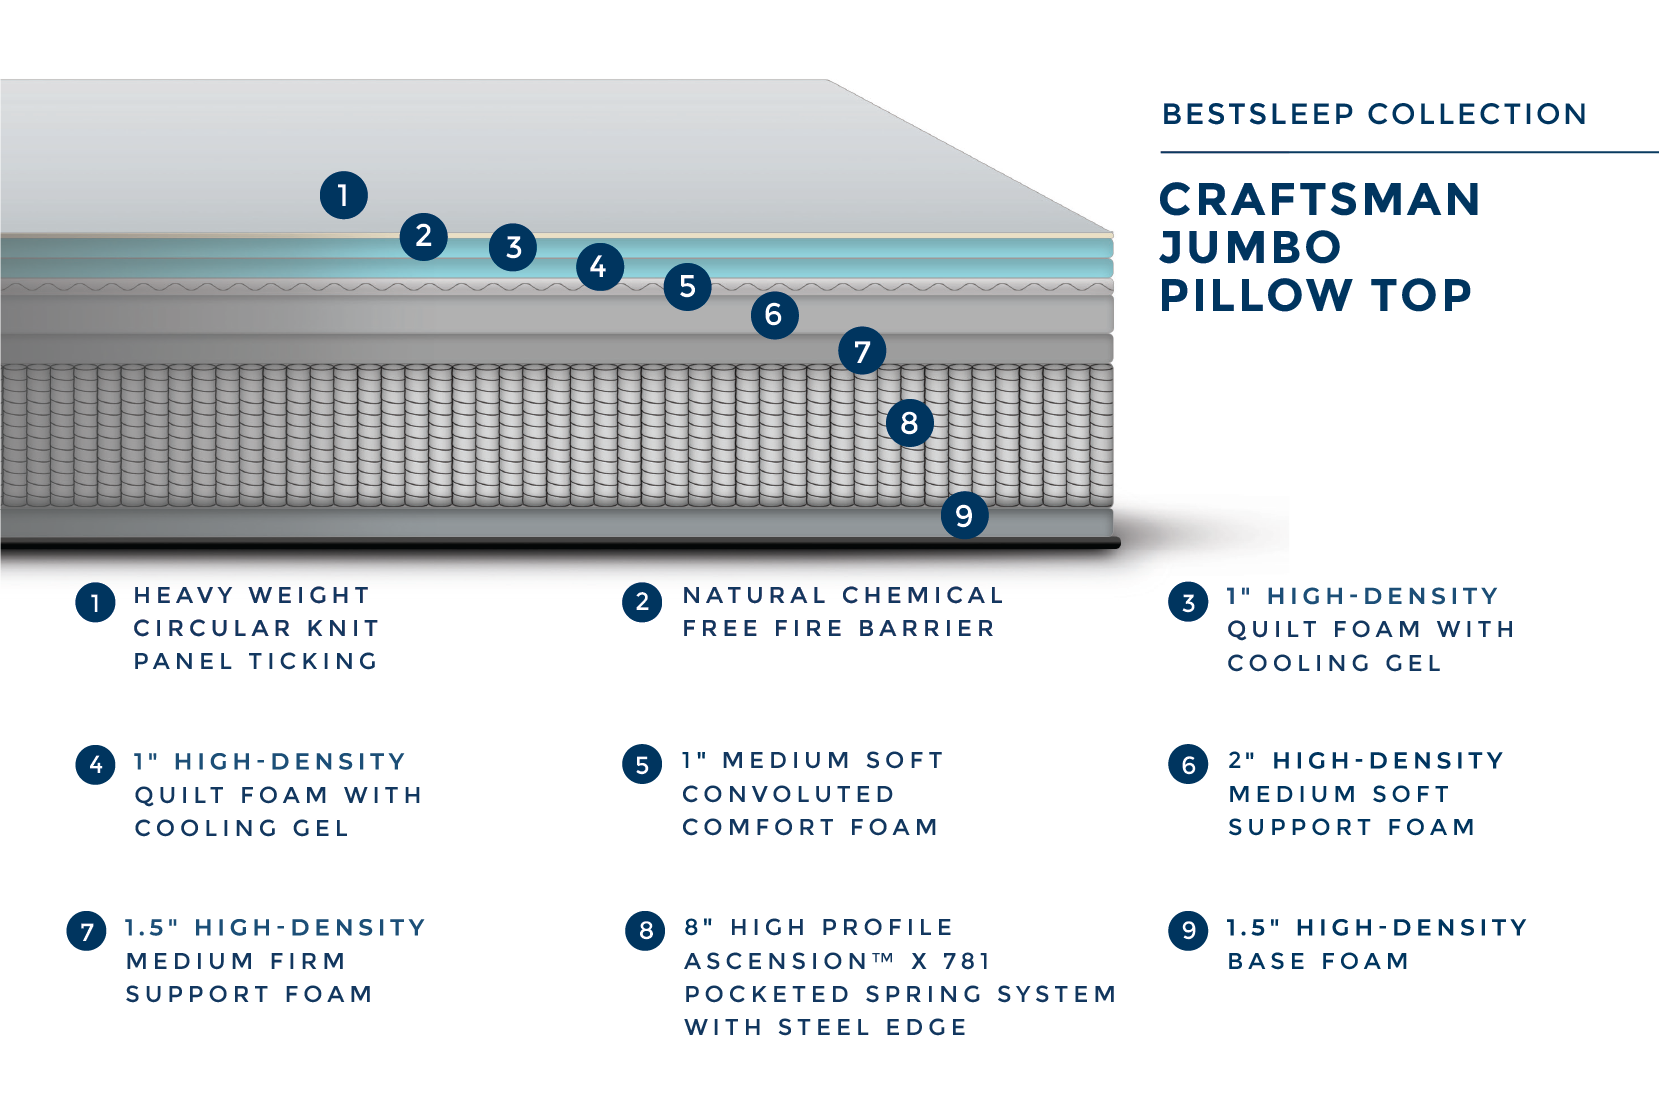 BestSleep Collection – Craftsman Jumbo Pillow Top. 9 layers including cooling gem, foam and a pocketed steel spring system.